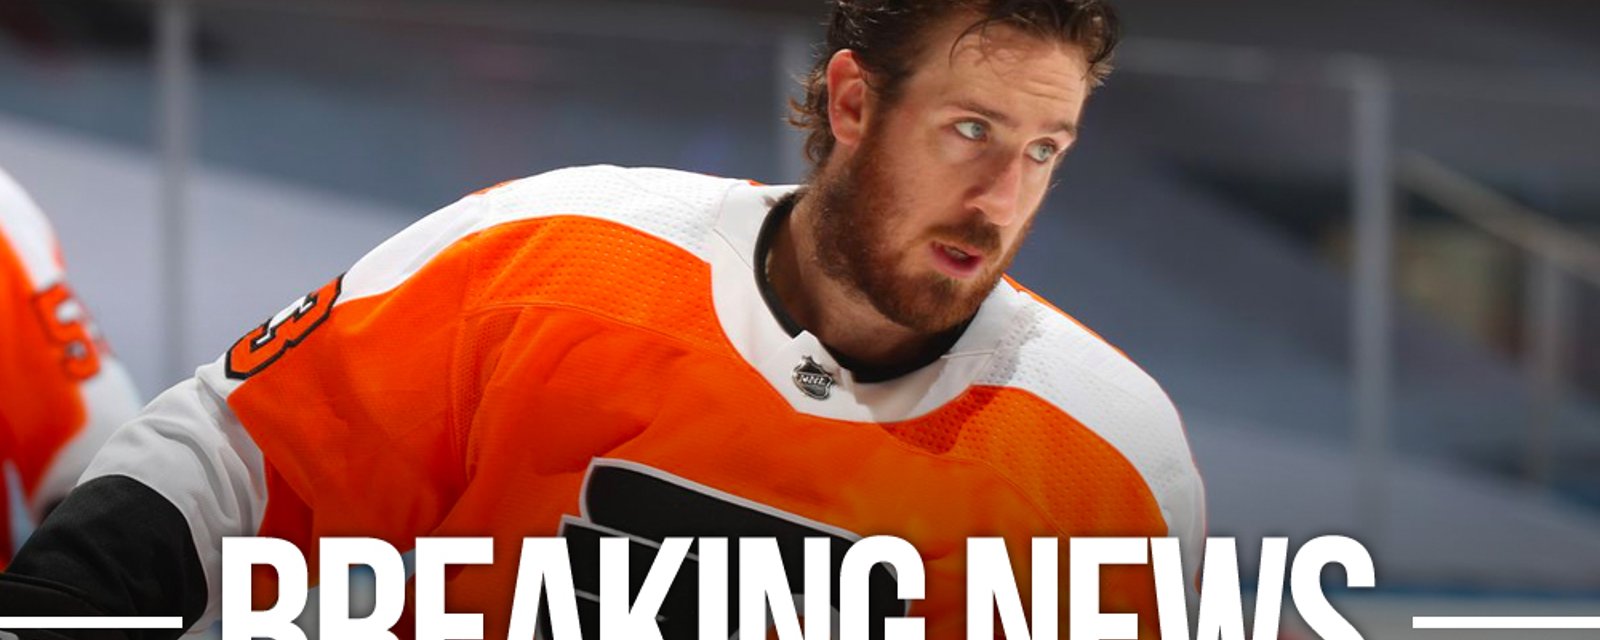 $7 million man Kevin Hayes will be a healthy scratch for the Flyers tonight